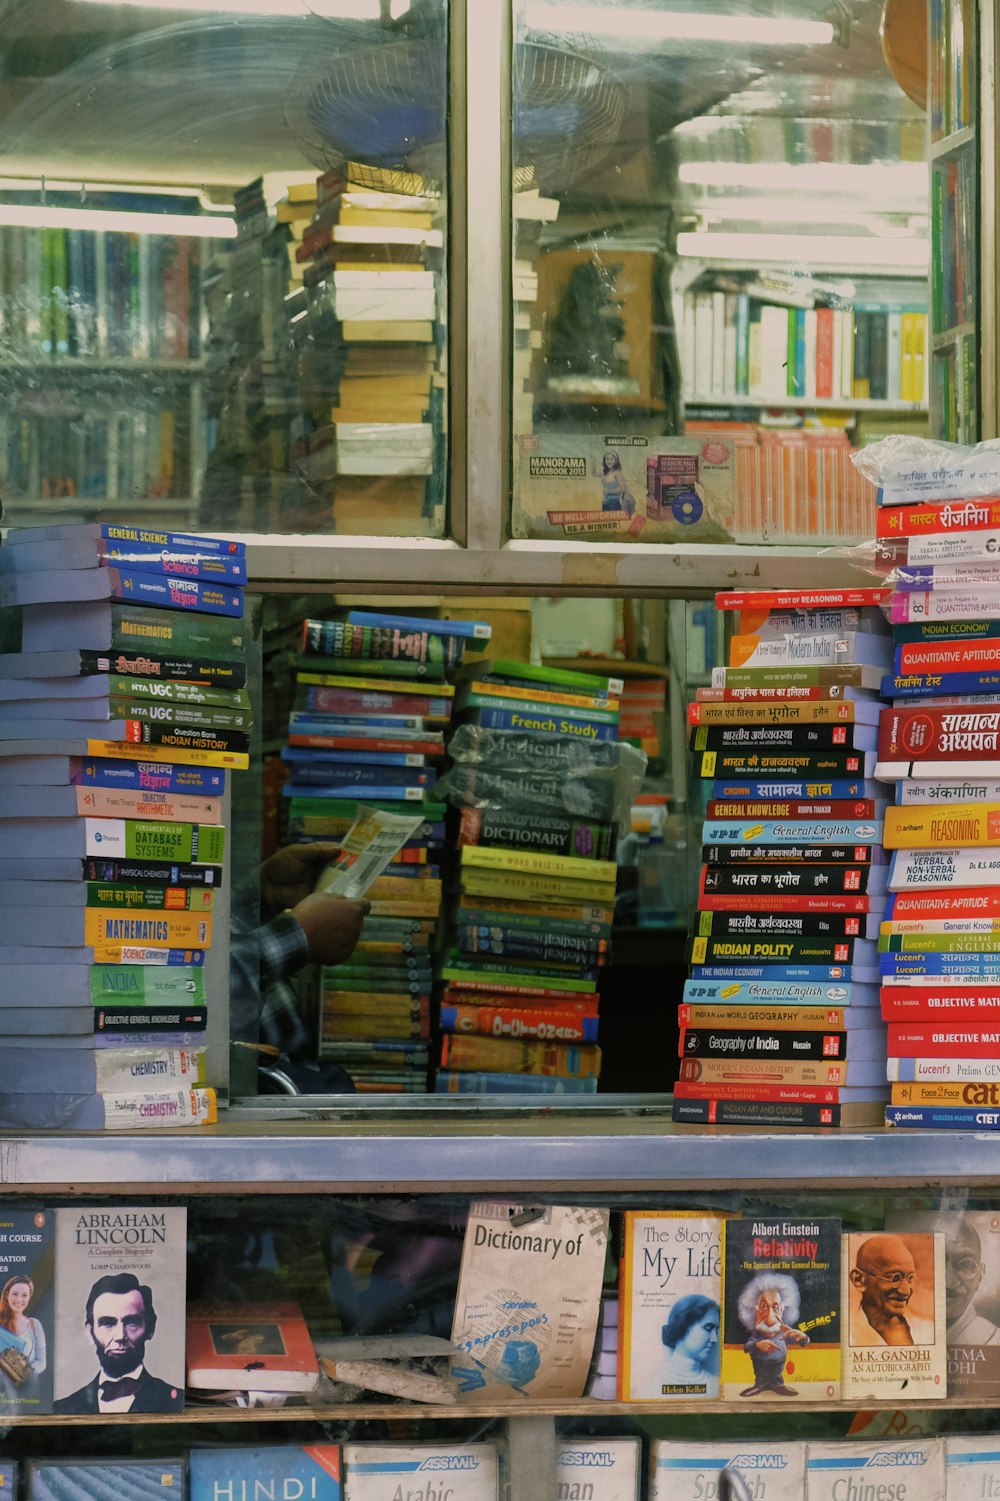 a display of books in a store window